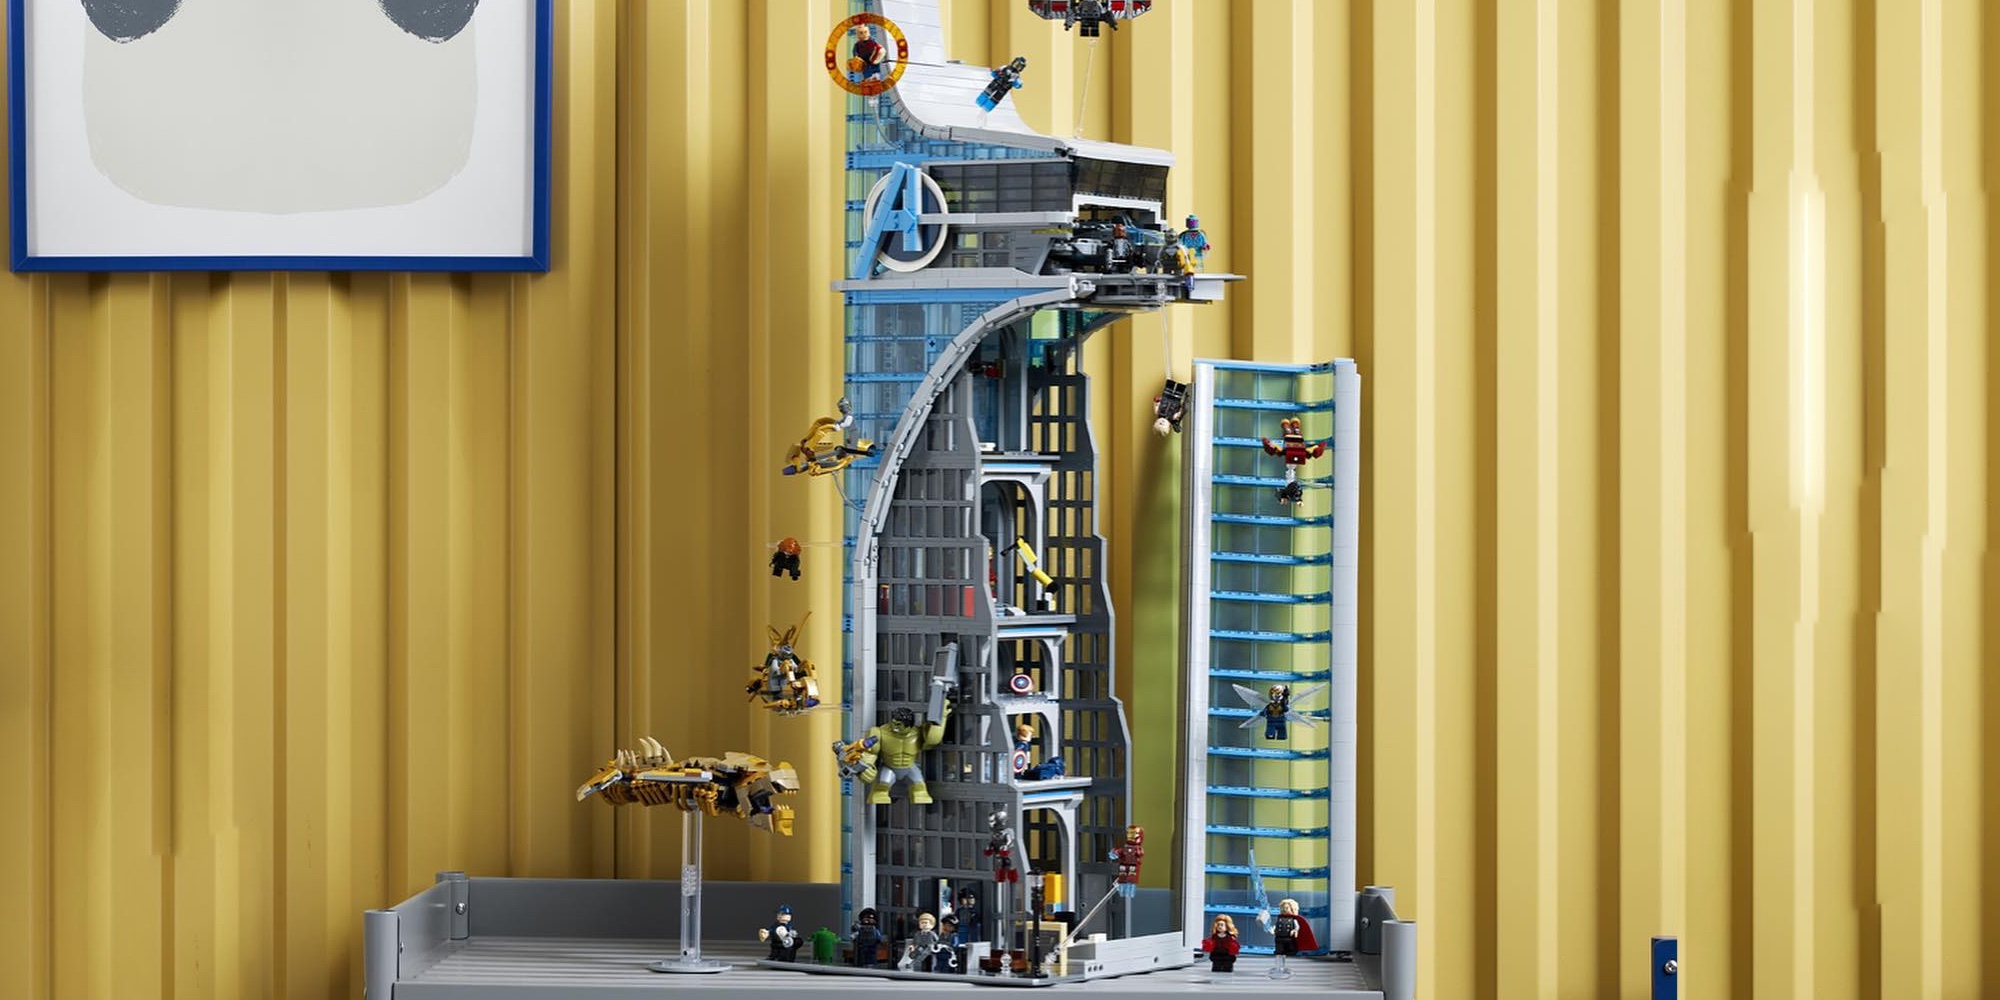 LEGO Avengers Tower first look!